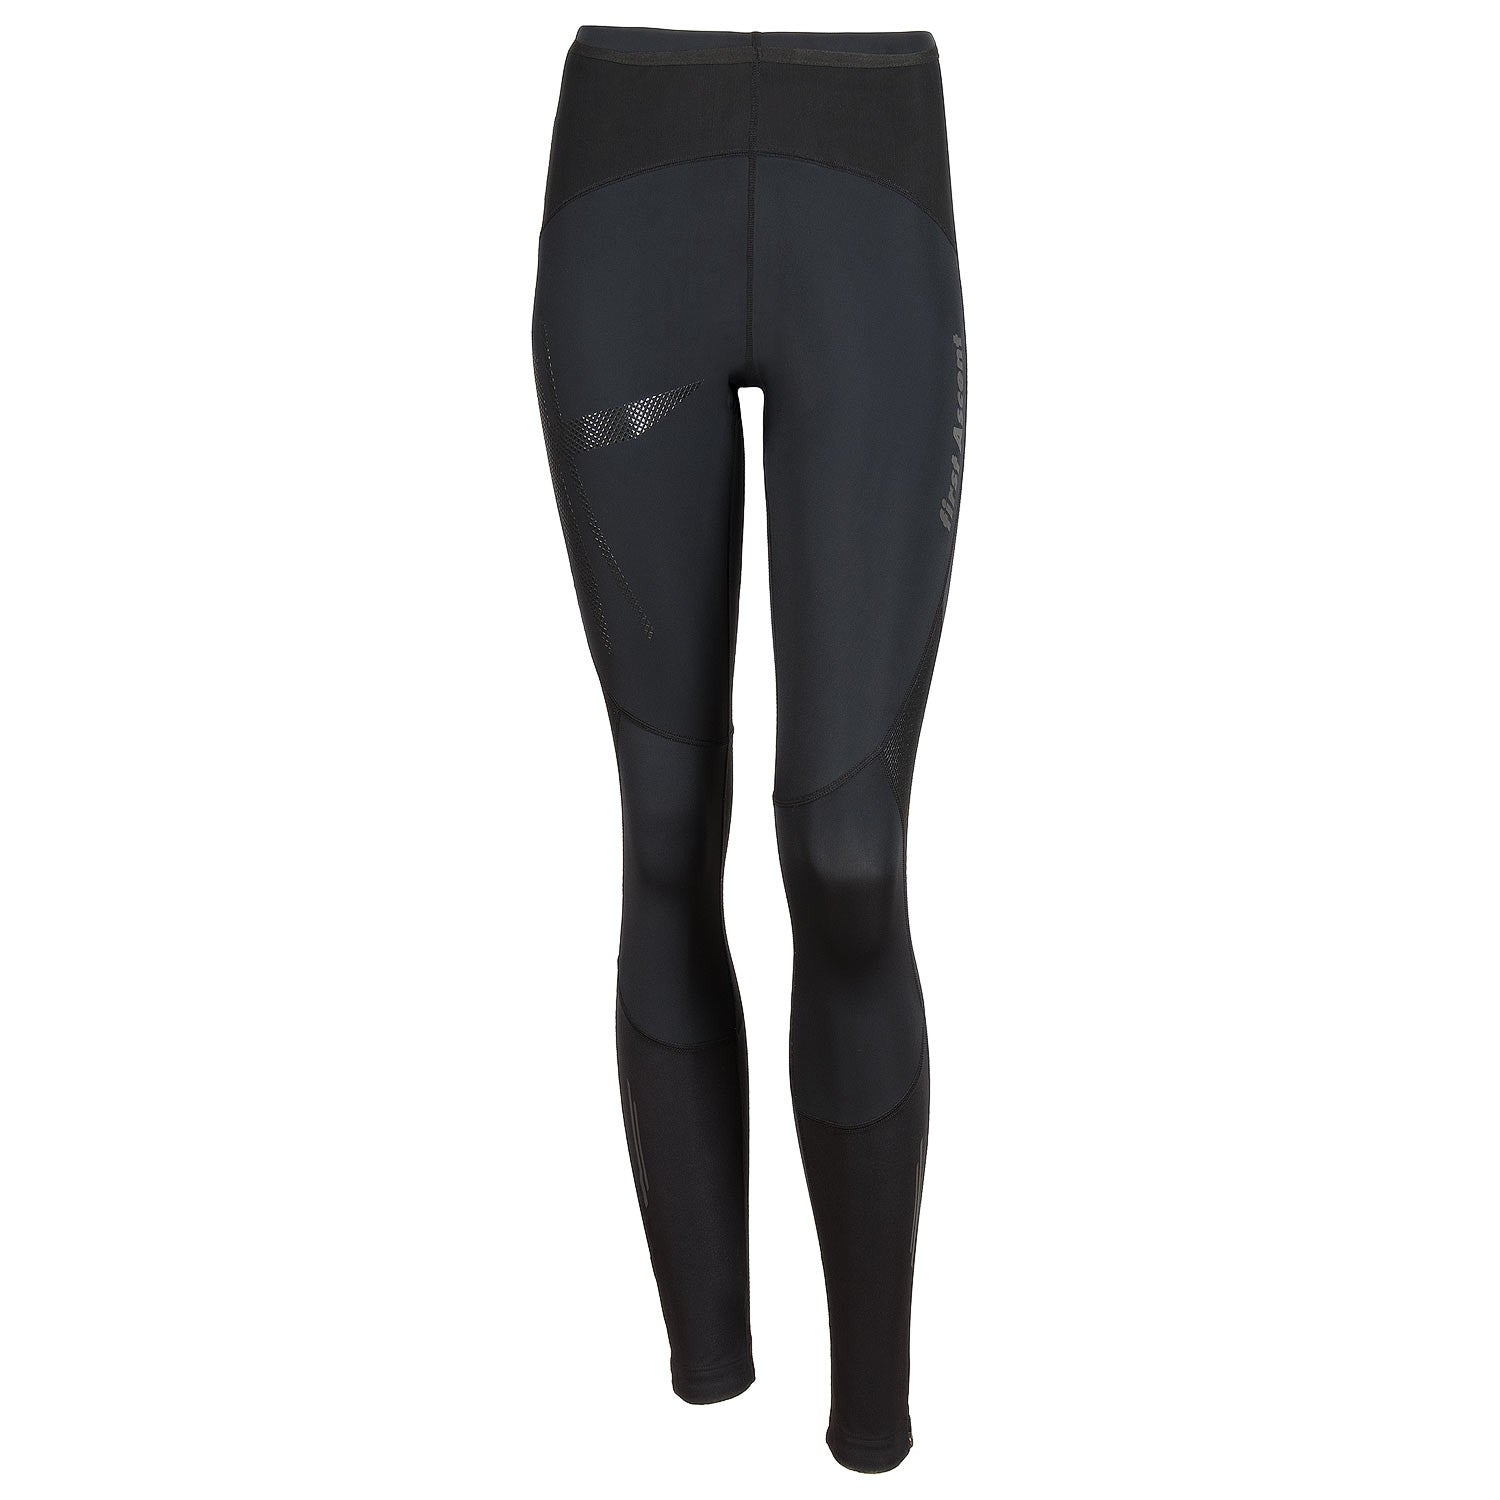 First Ascent Women's X-Trail Tights